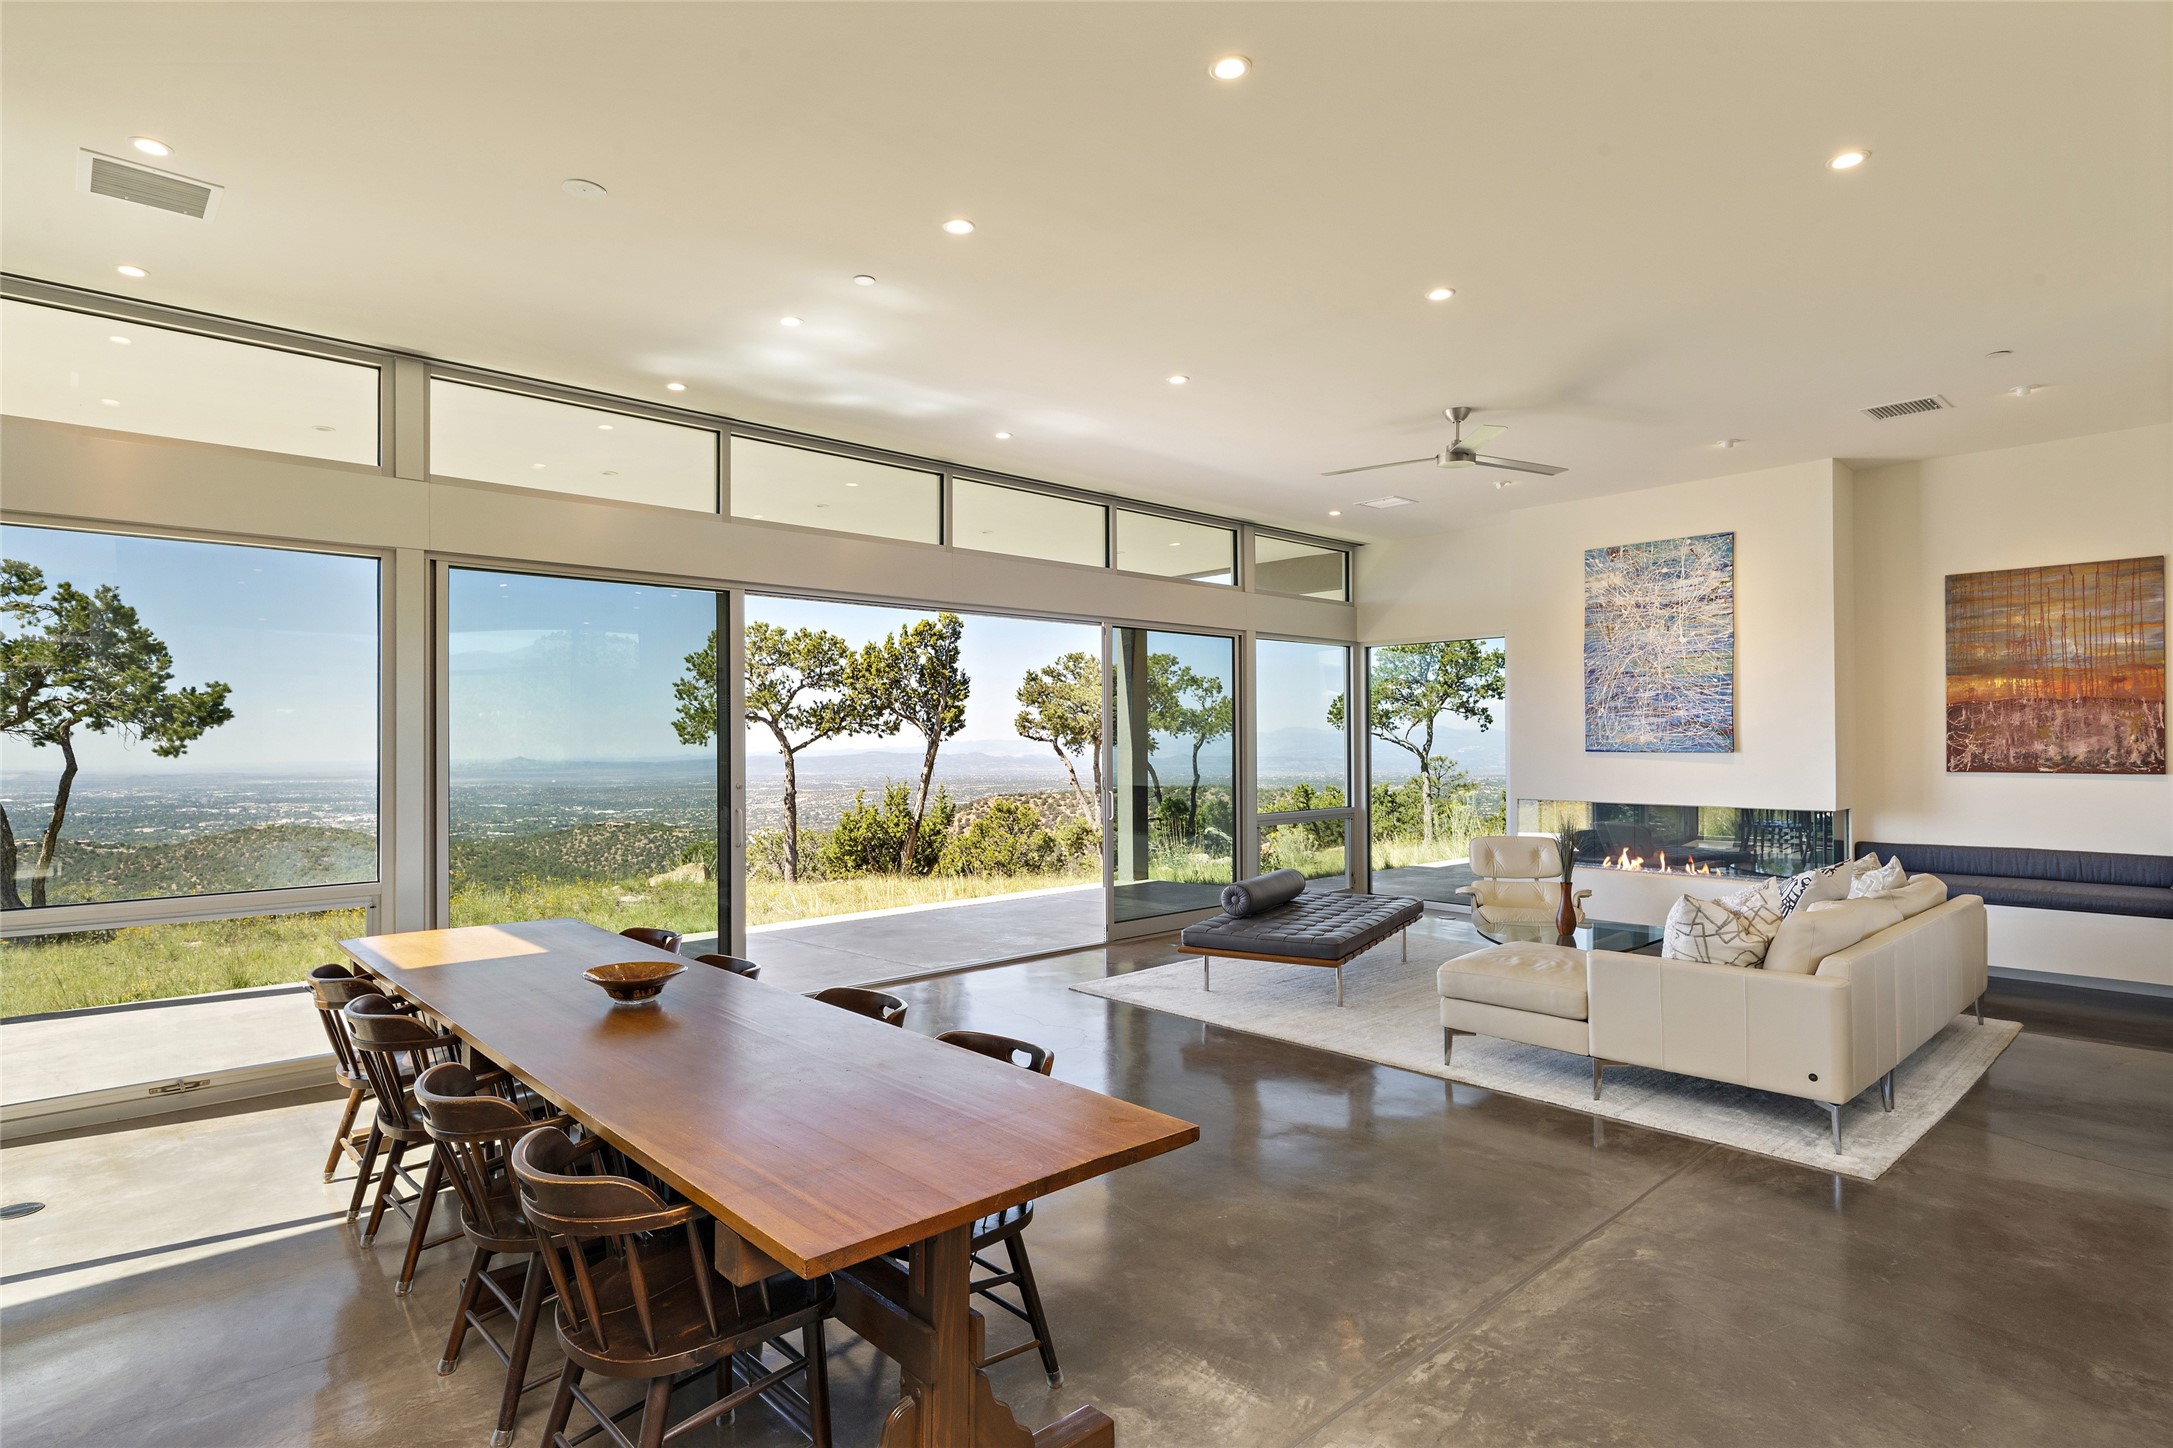 Open Dining Room / Living Room with Views